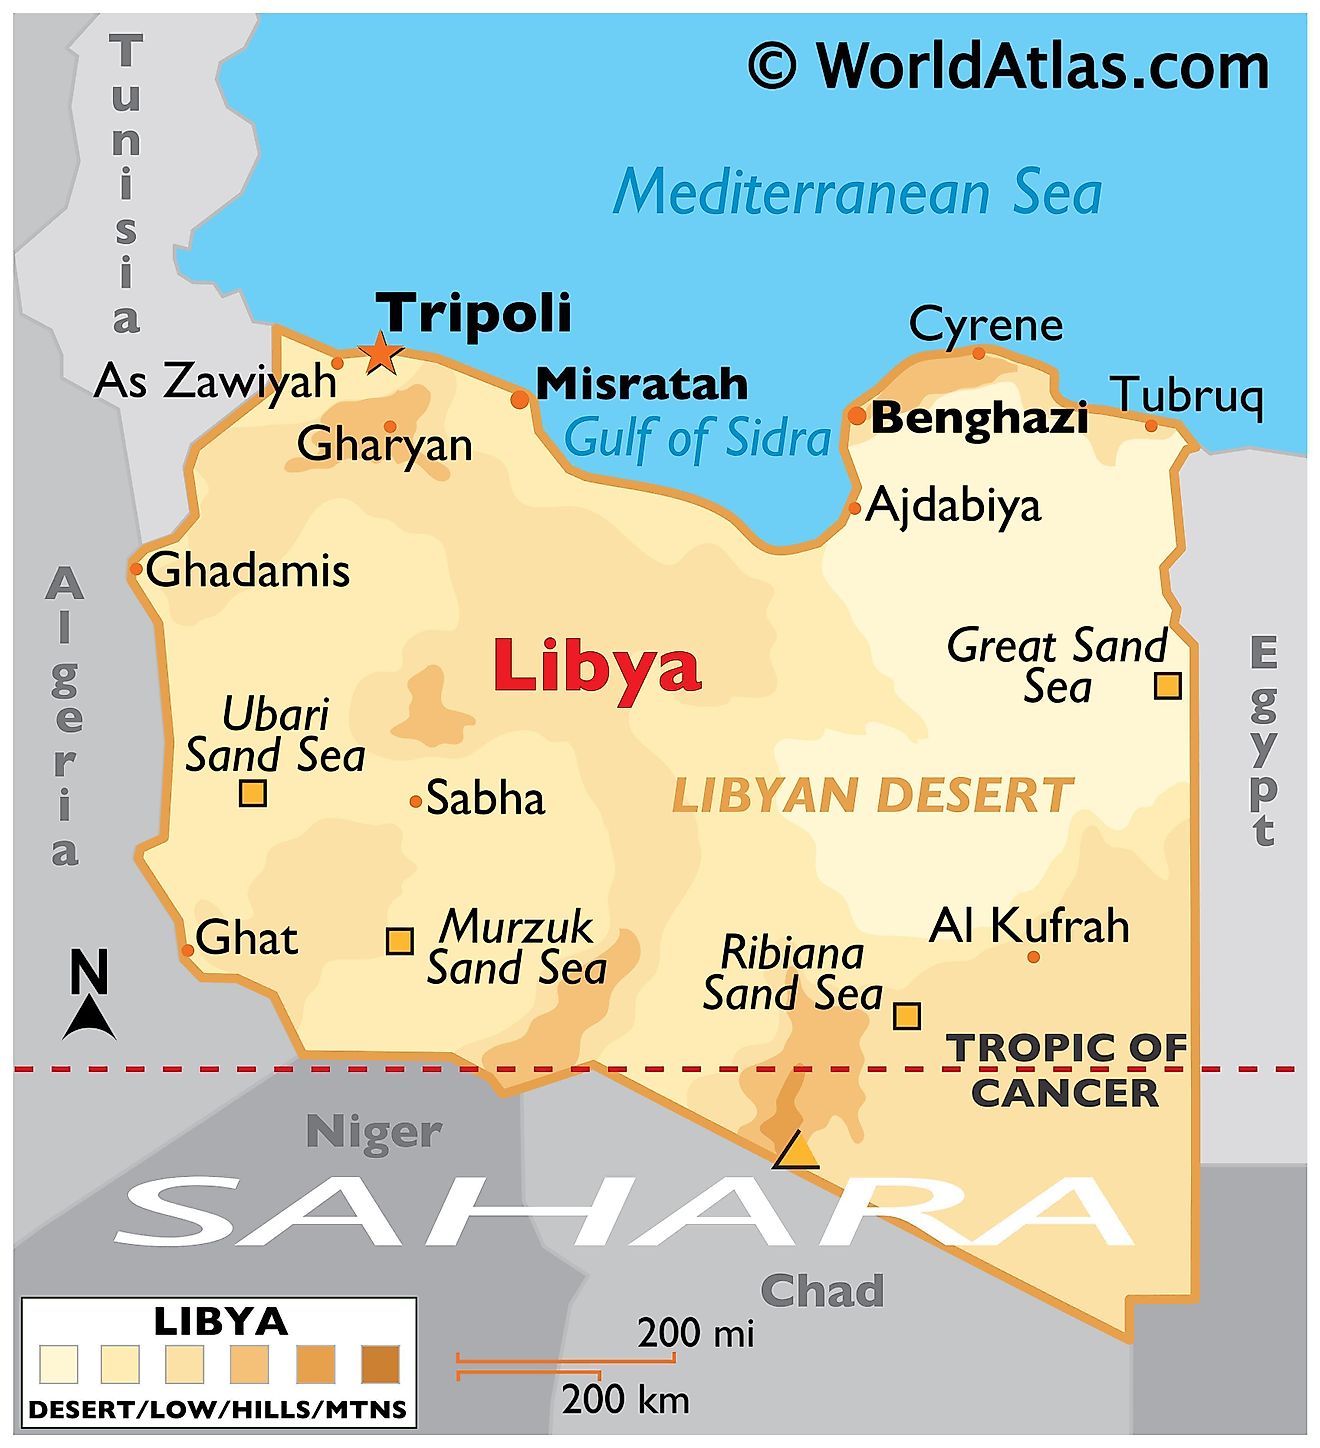 Physical Map of Libya displaying state boundaries, relief, highest point, important cities, and desert with its sand seas.